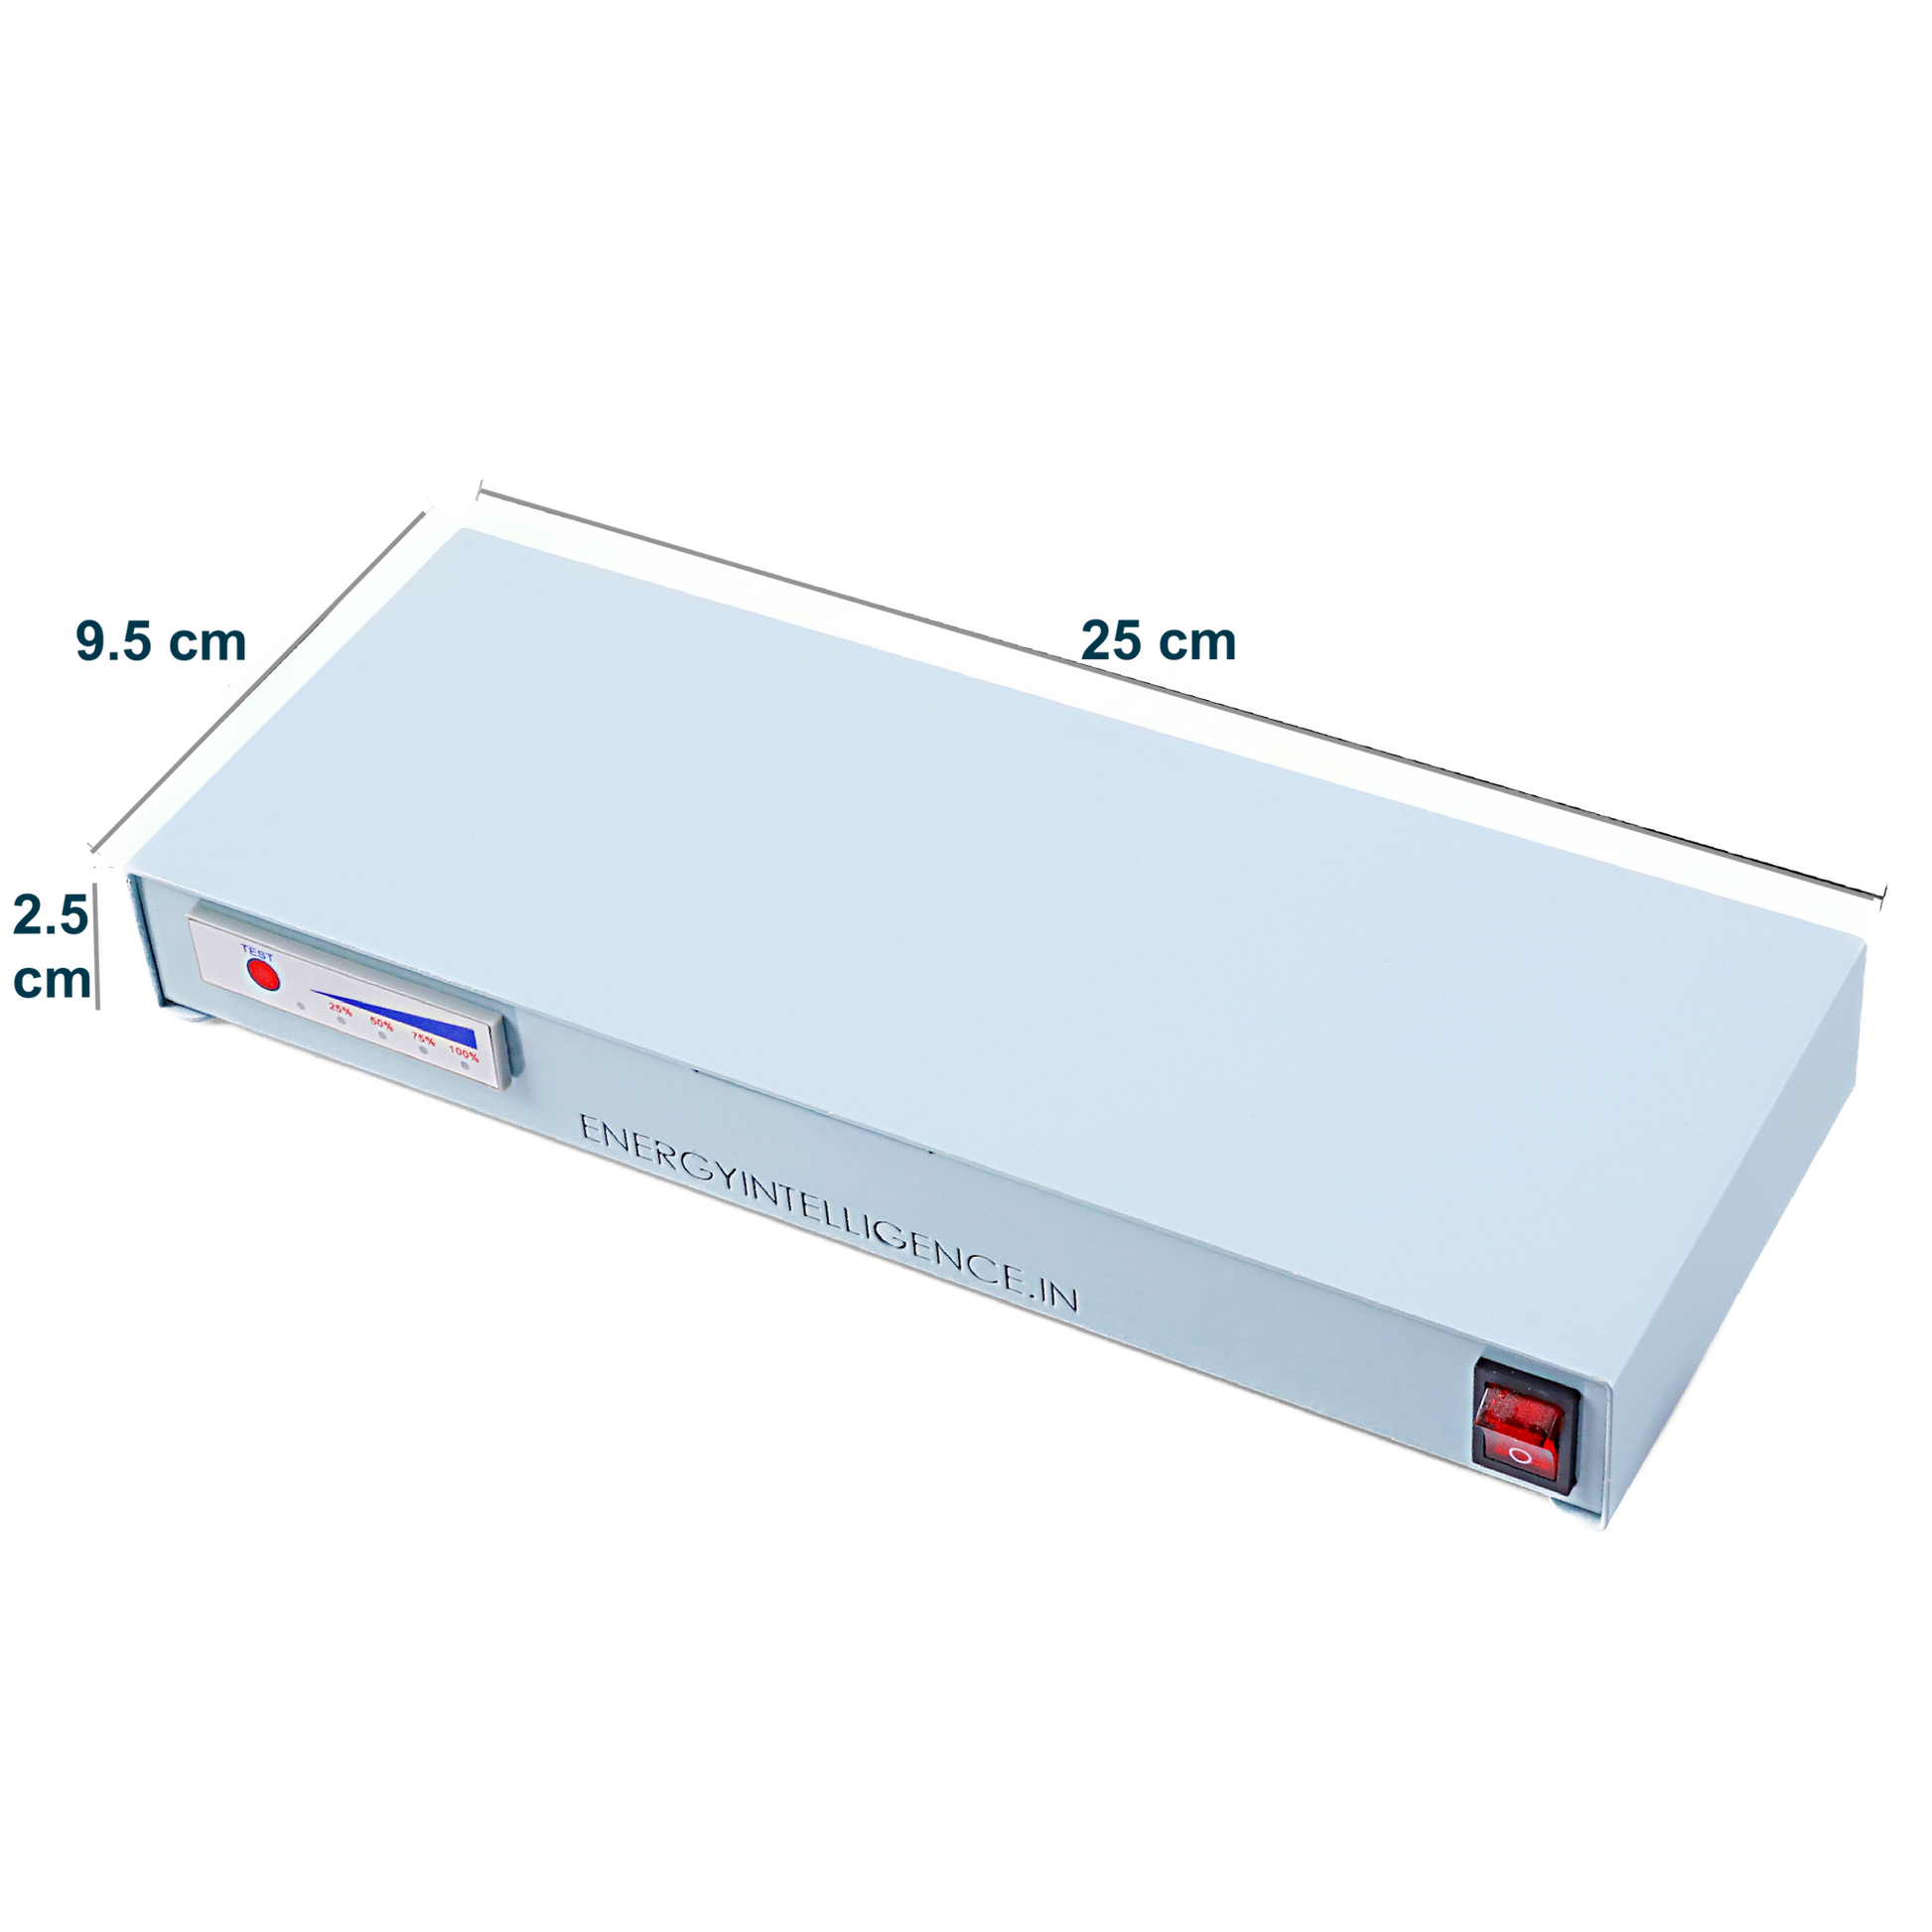 An Isometric View of the NUC Powerbank for uniinterrupted NUC operation